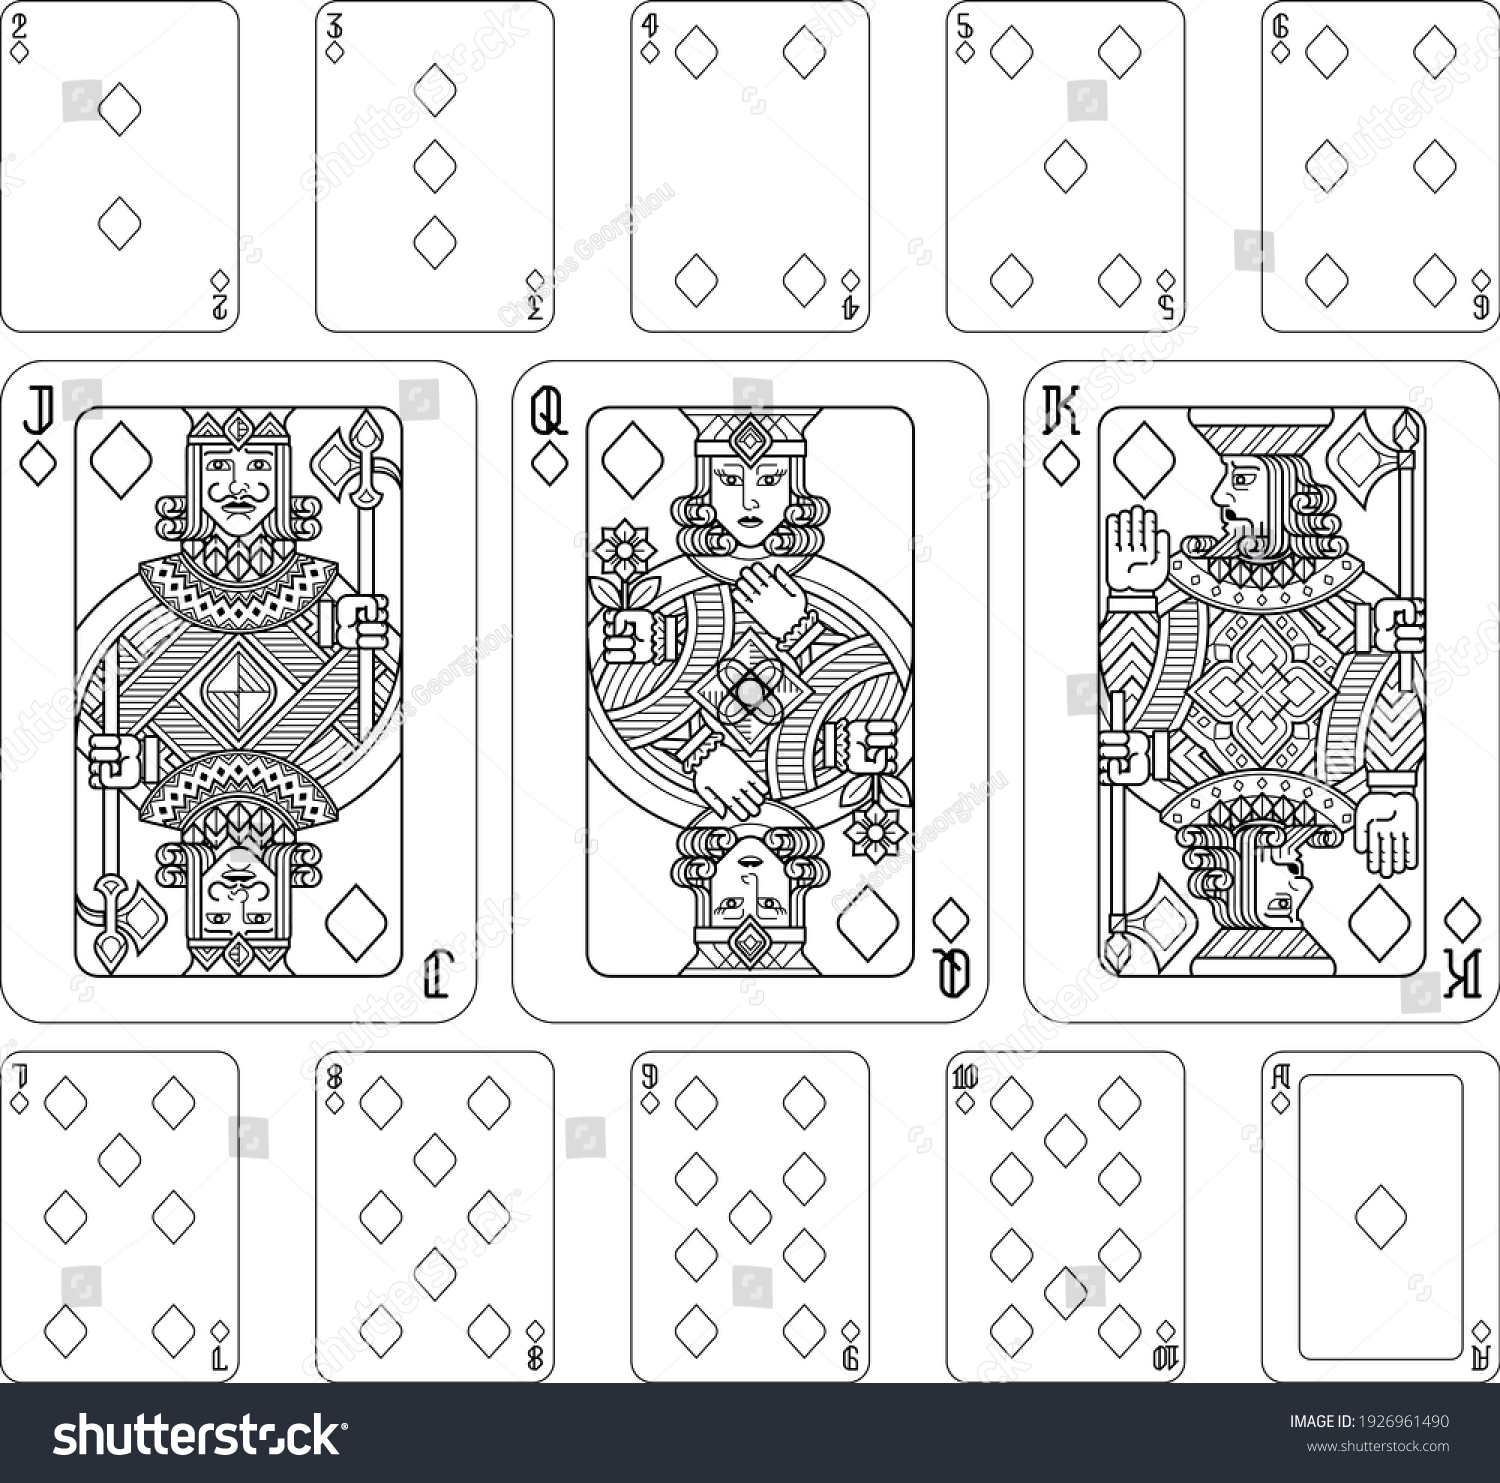 Playing cards diamonds set black white stock vector royalty free